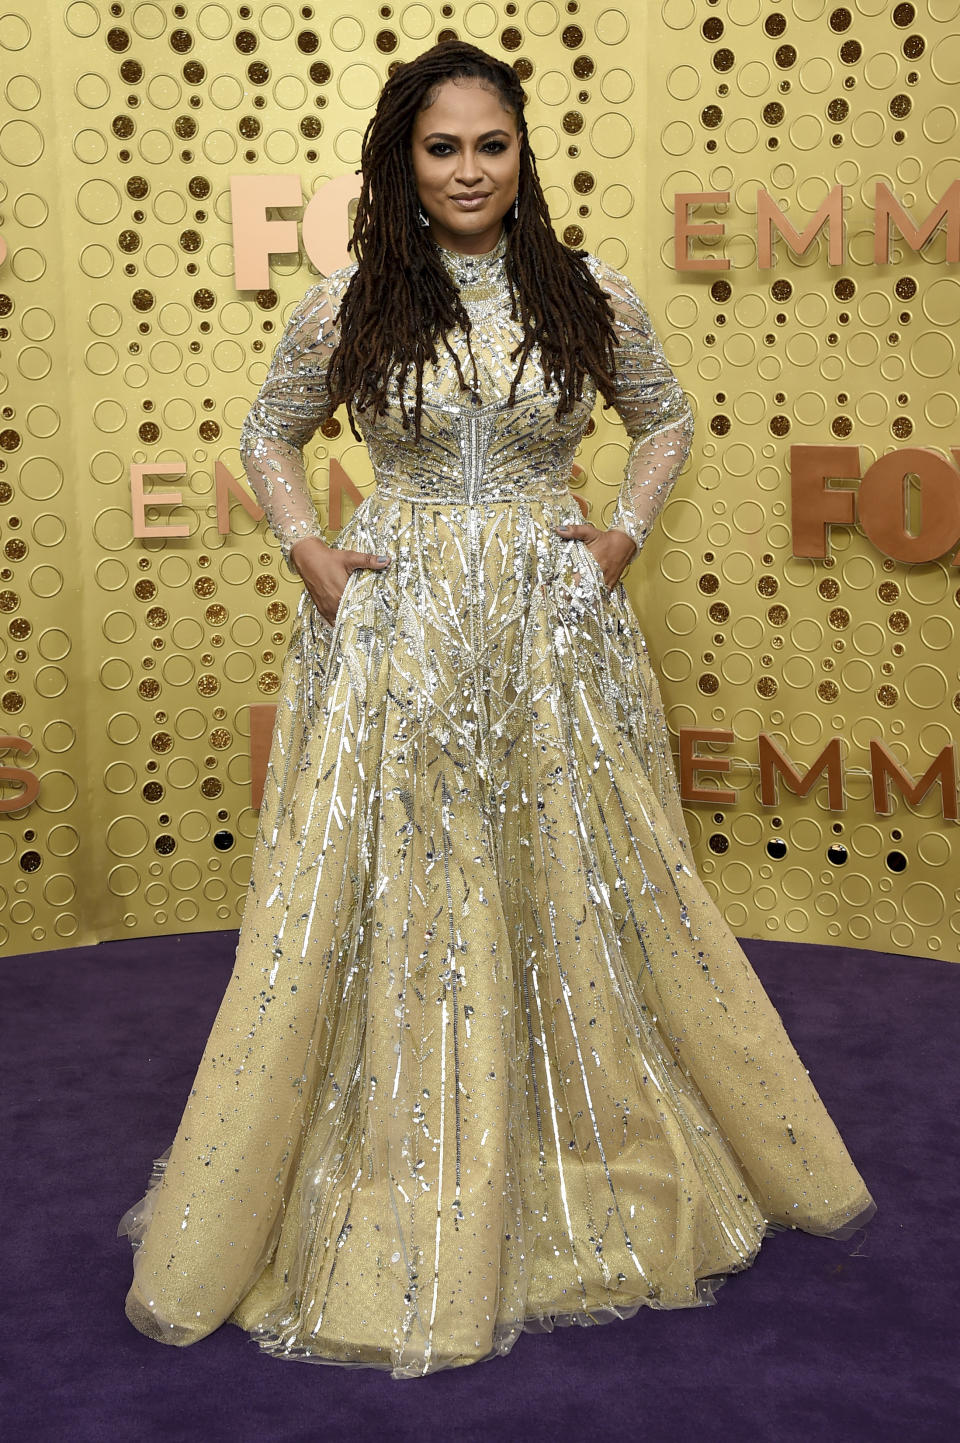 FILE - Ava DuVernay arrives at the 71st Primetime Emmy Awards in Los Angeles on Sept. 22, 2019. DuVernay, who created the TV series “Queen Sugar” hired Cierra Glaude to work on the Oscar-nominated 2014 film “Selma” as well as her CBS pilot “For Justice.” (Photo by Jordan Strauss/Invision/AP, File)